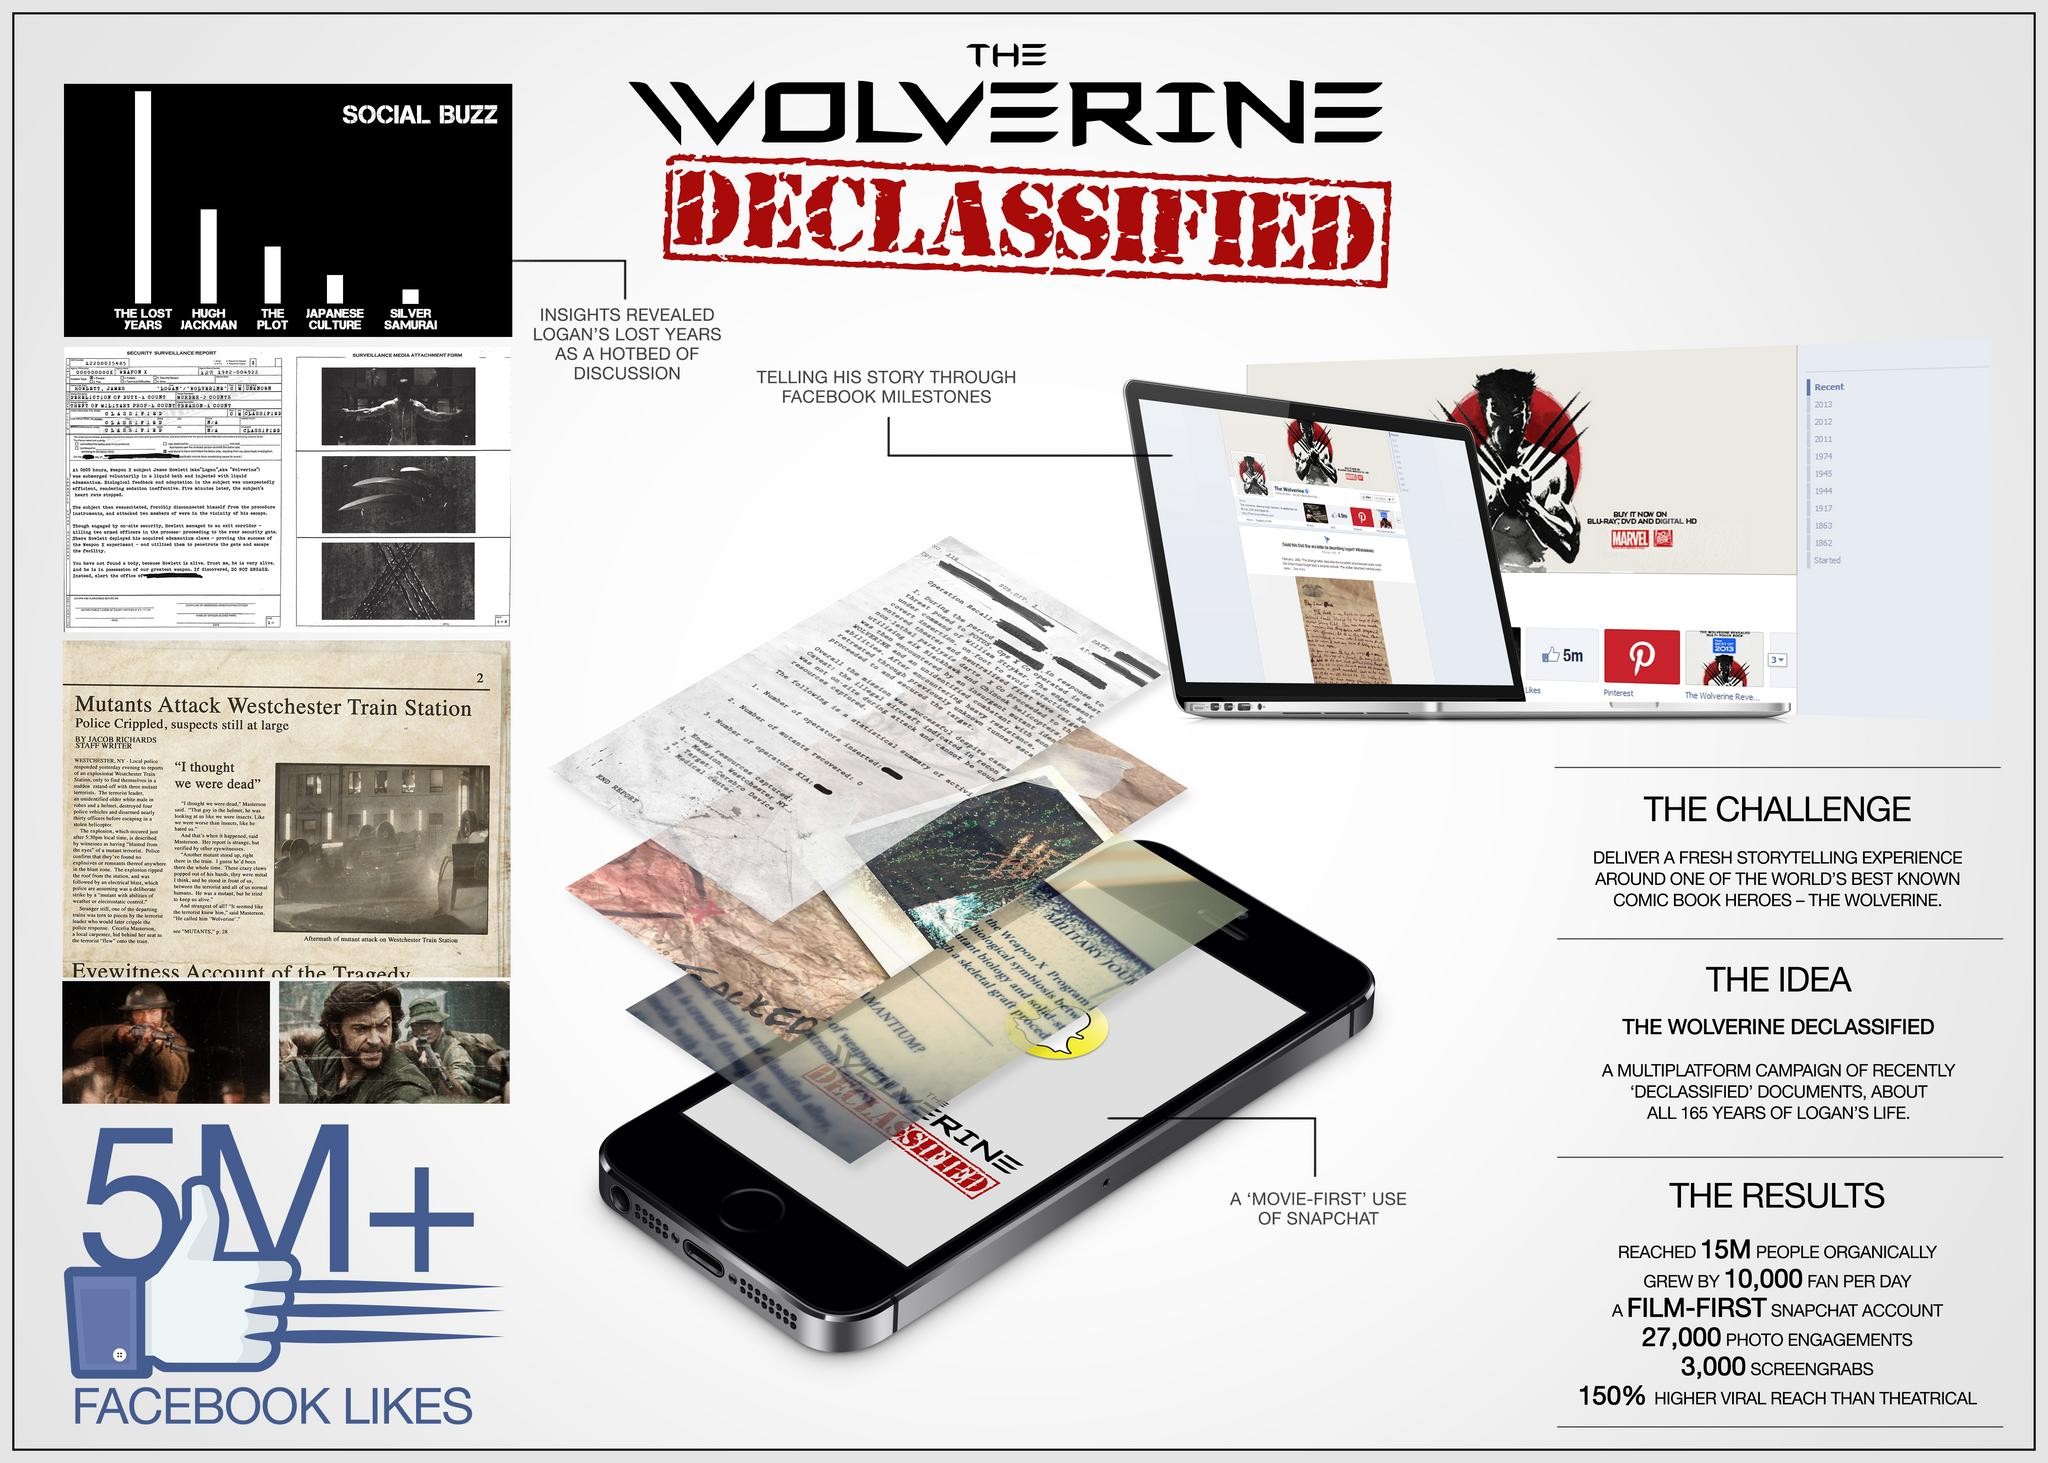 THE WOLVERINE DECLASSIFIED